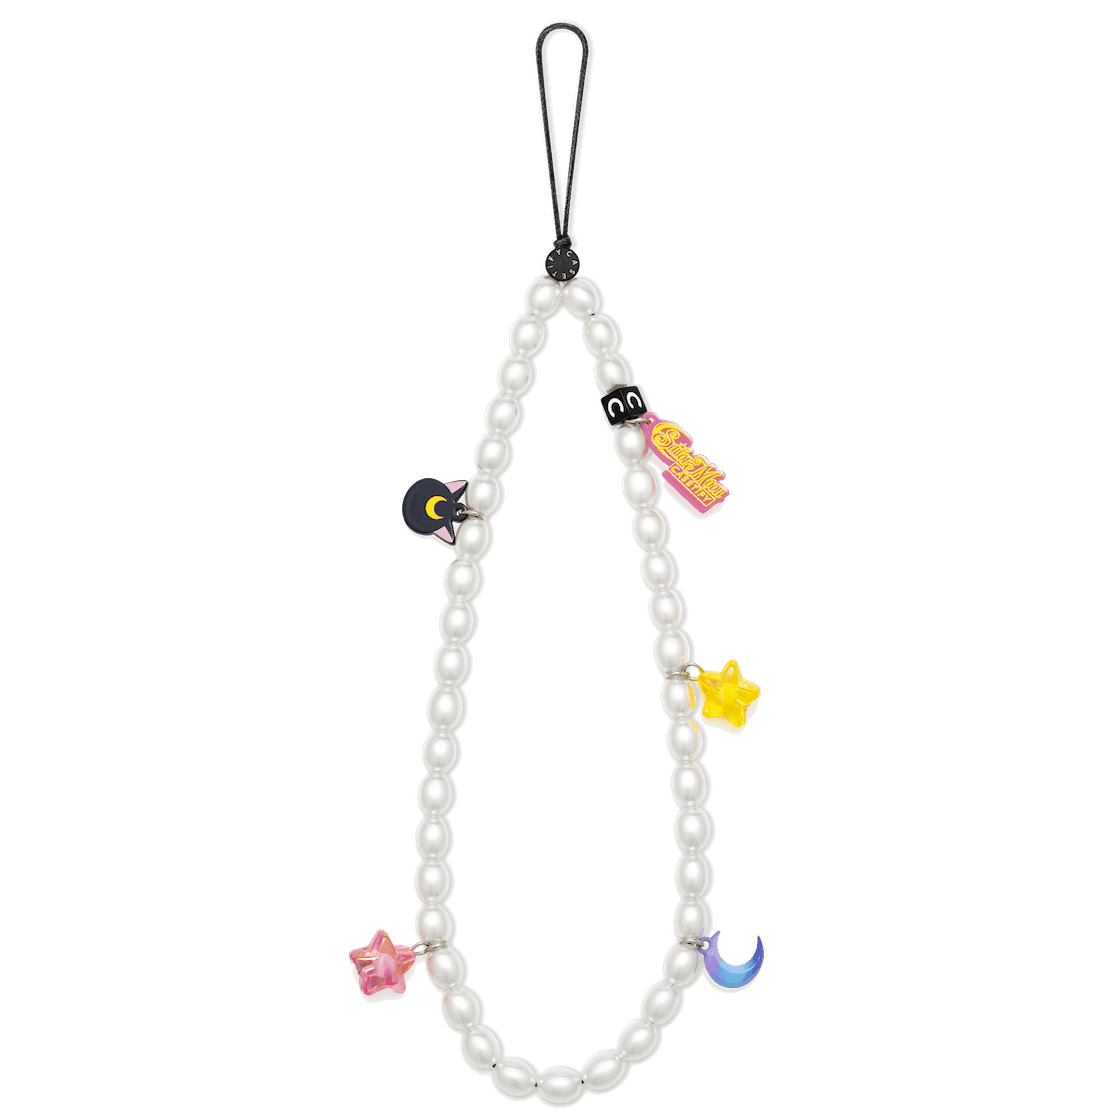 Casetify's new Sailor Moon phone charm on display